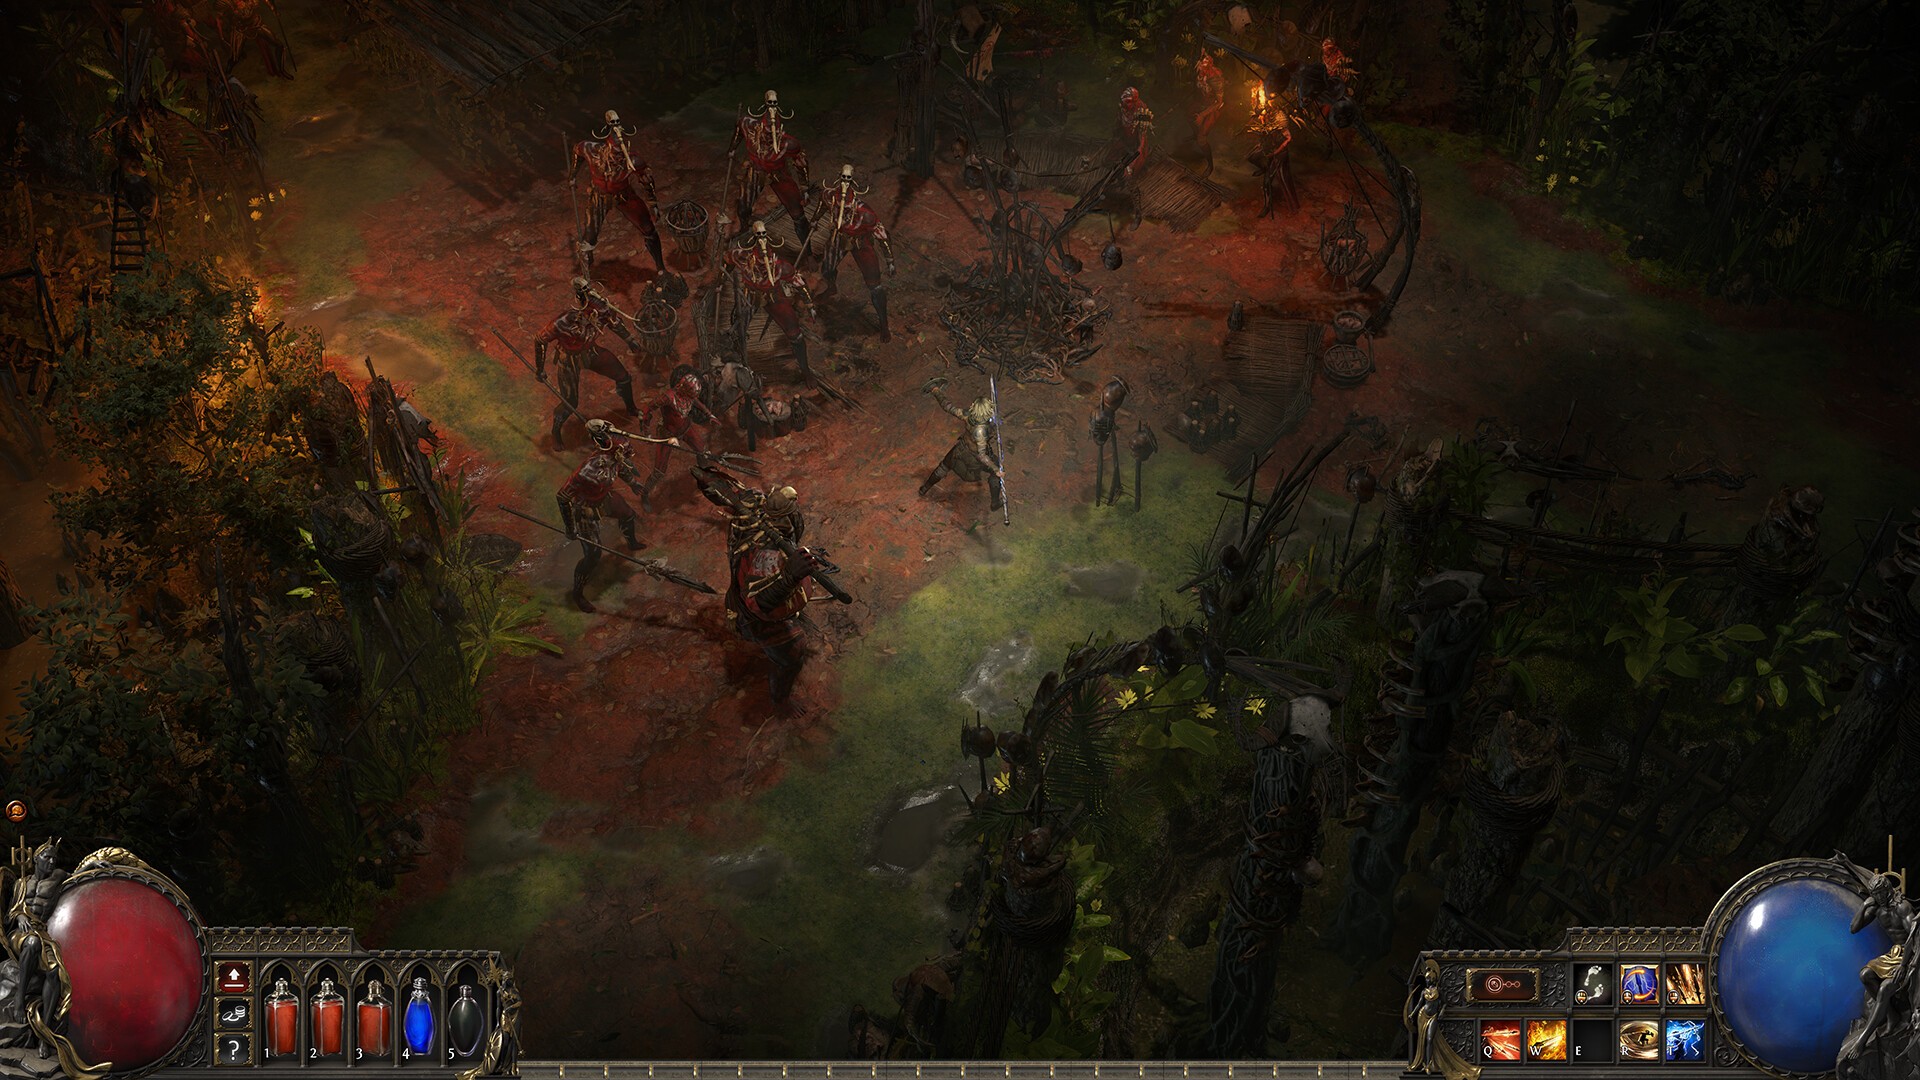 path of exile 2 graphics